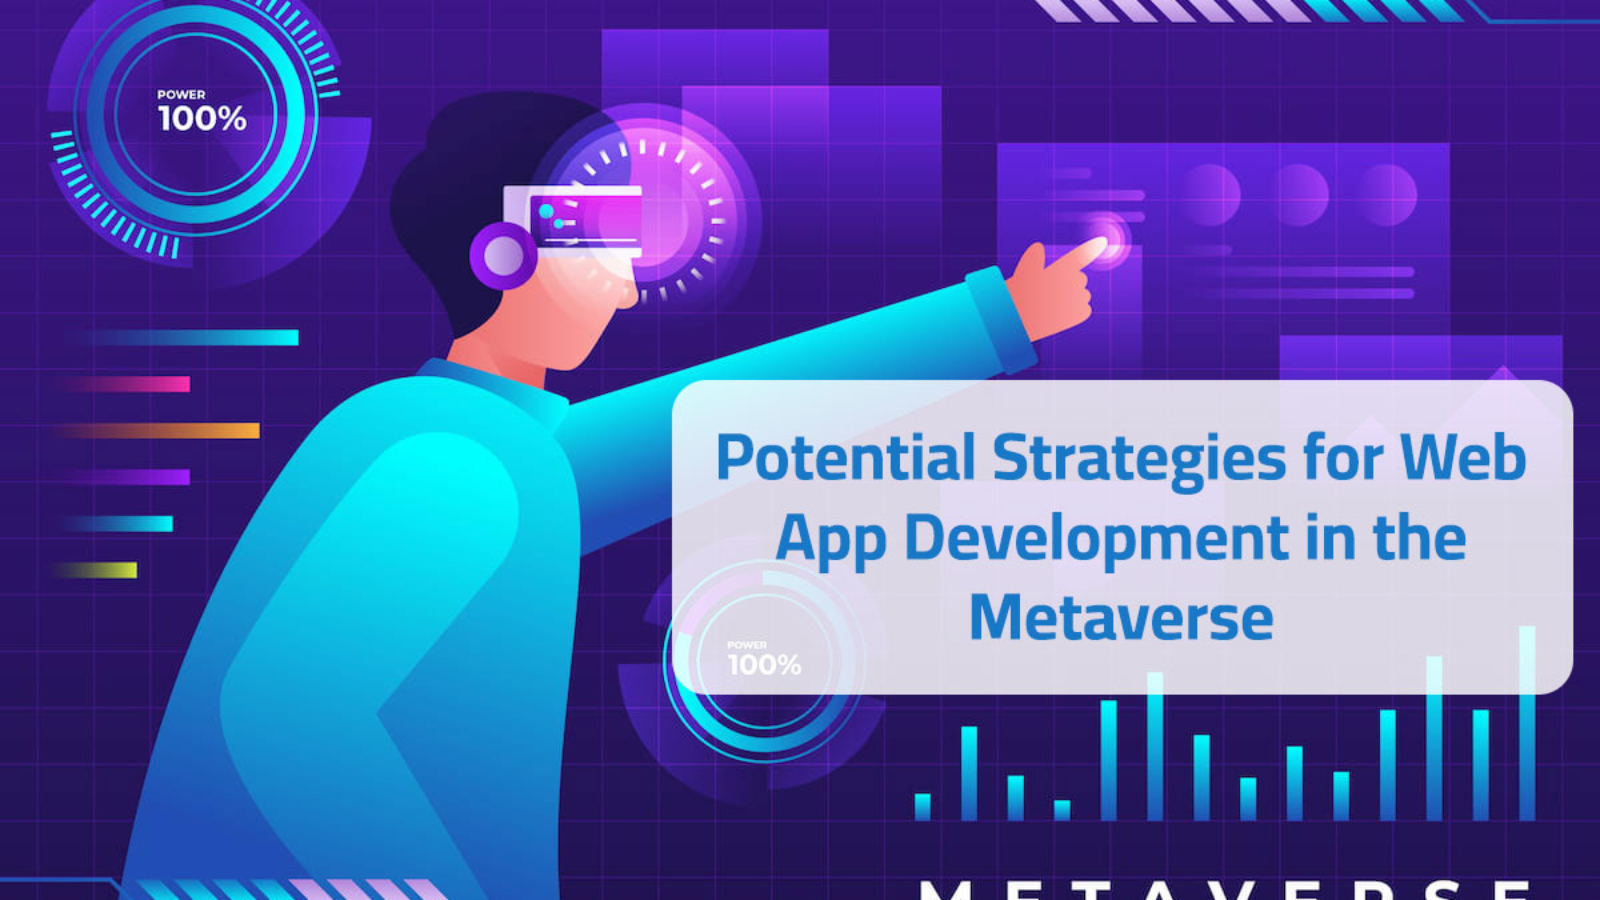 Potential Strategies for Web App Development in the Metaverse